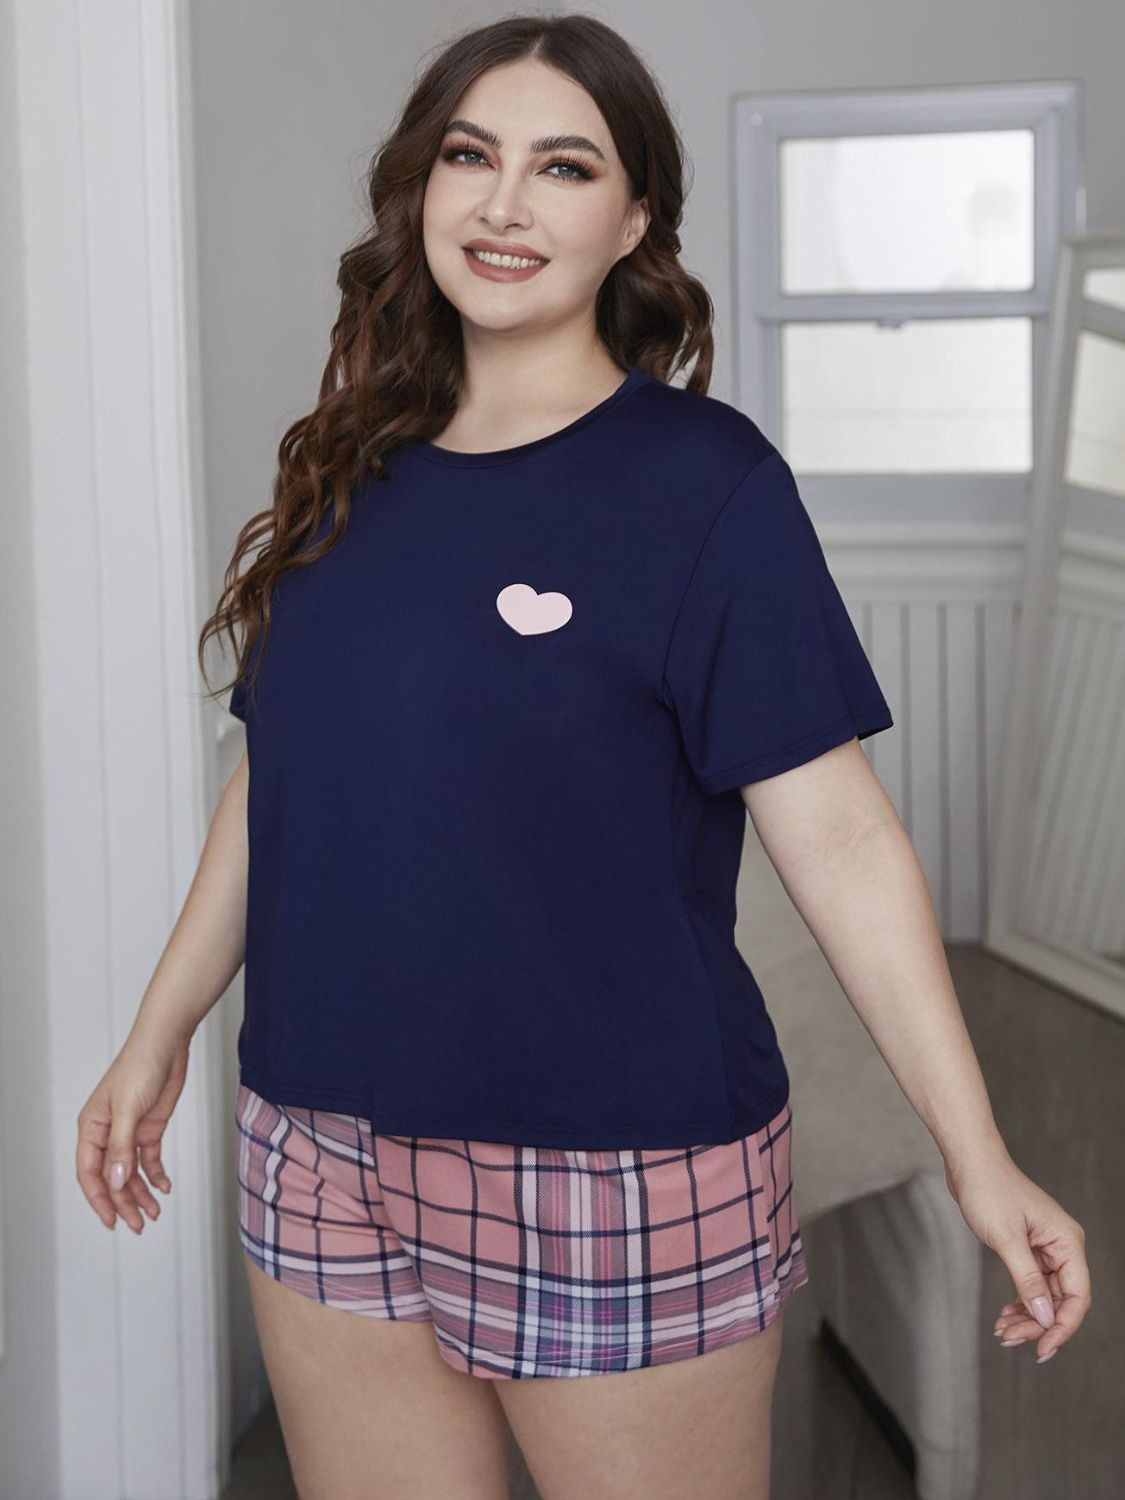 Plus Size Heart Graphic Top and Plaid Shorts Loungewear Set COCO CRESS